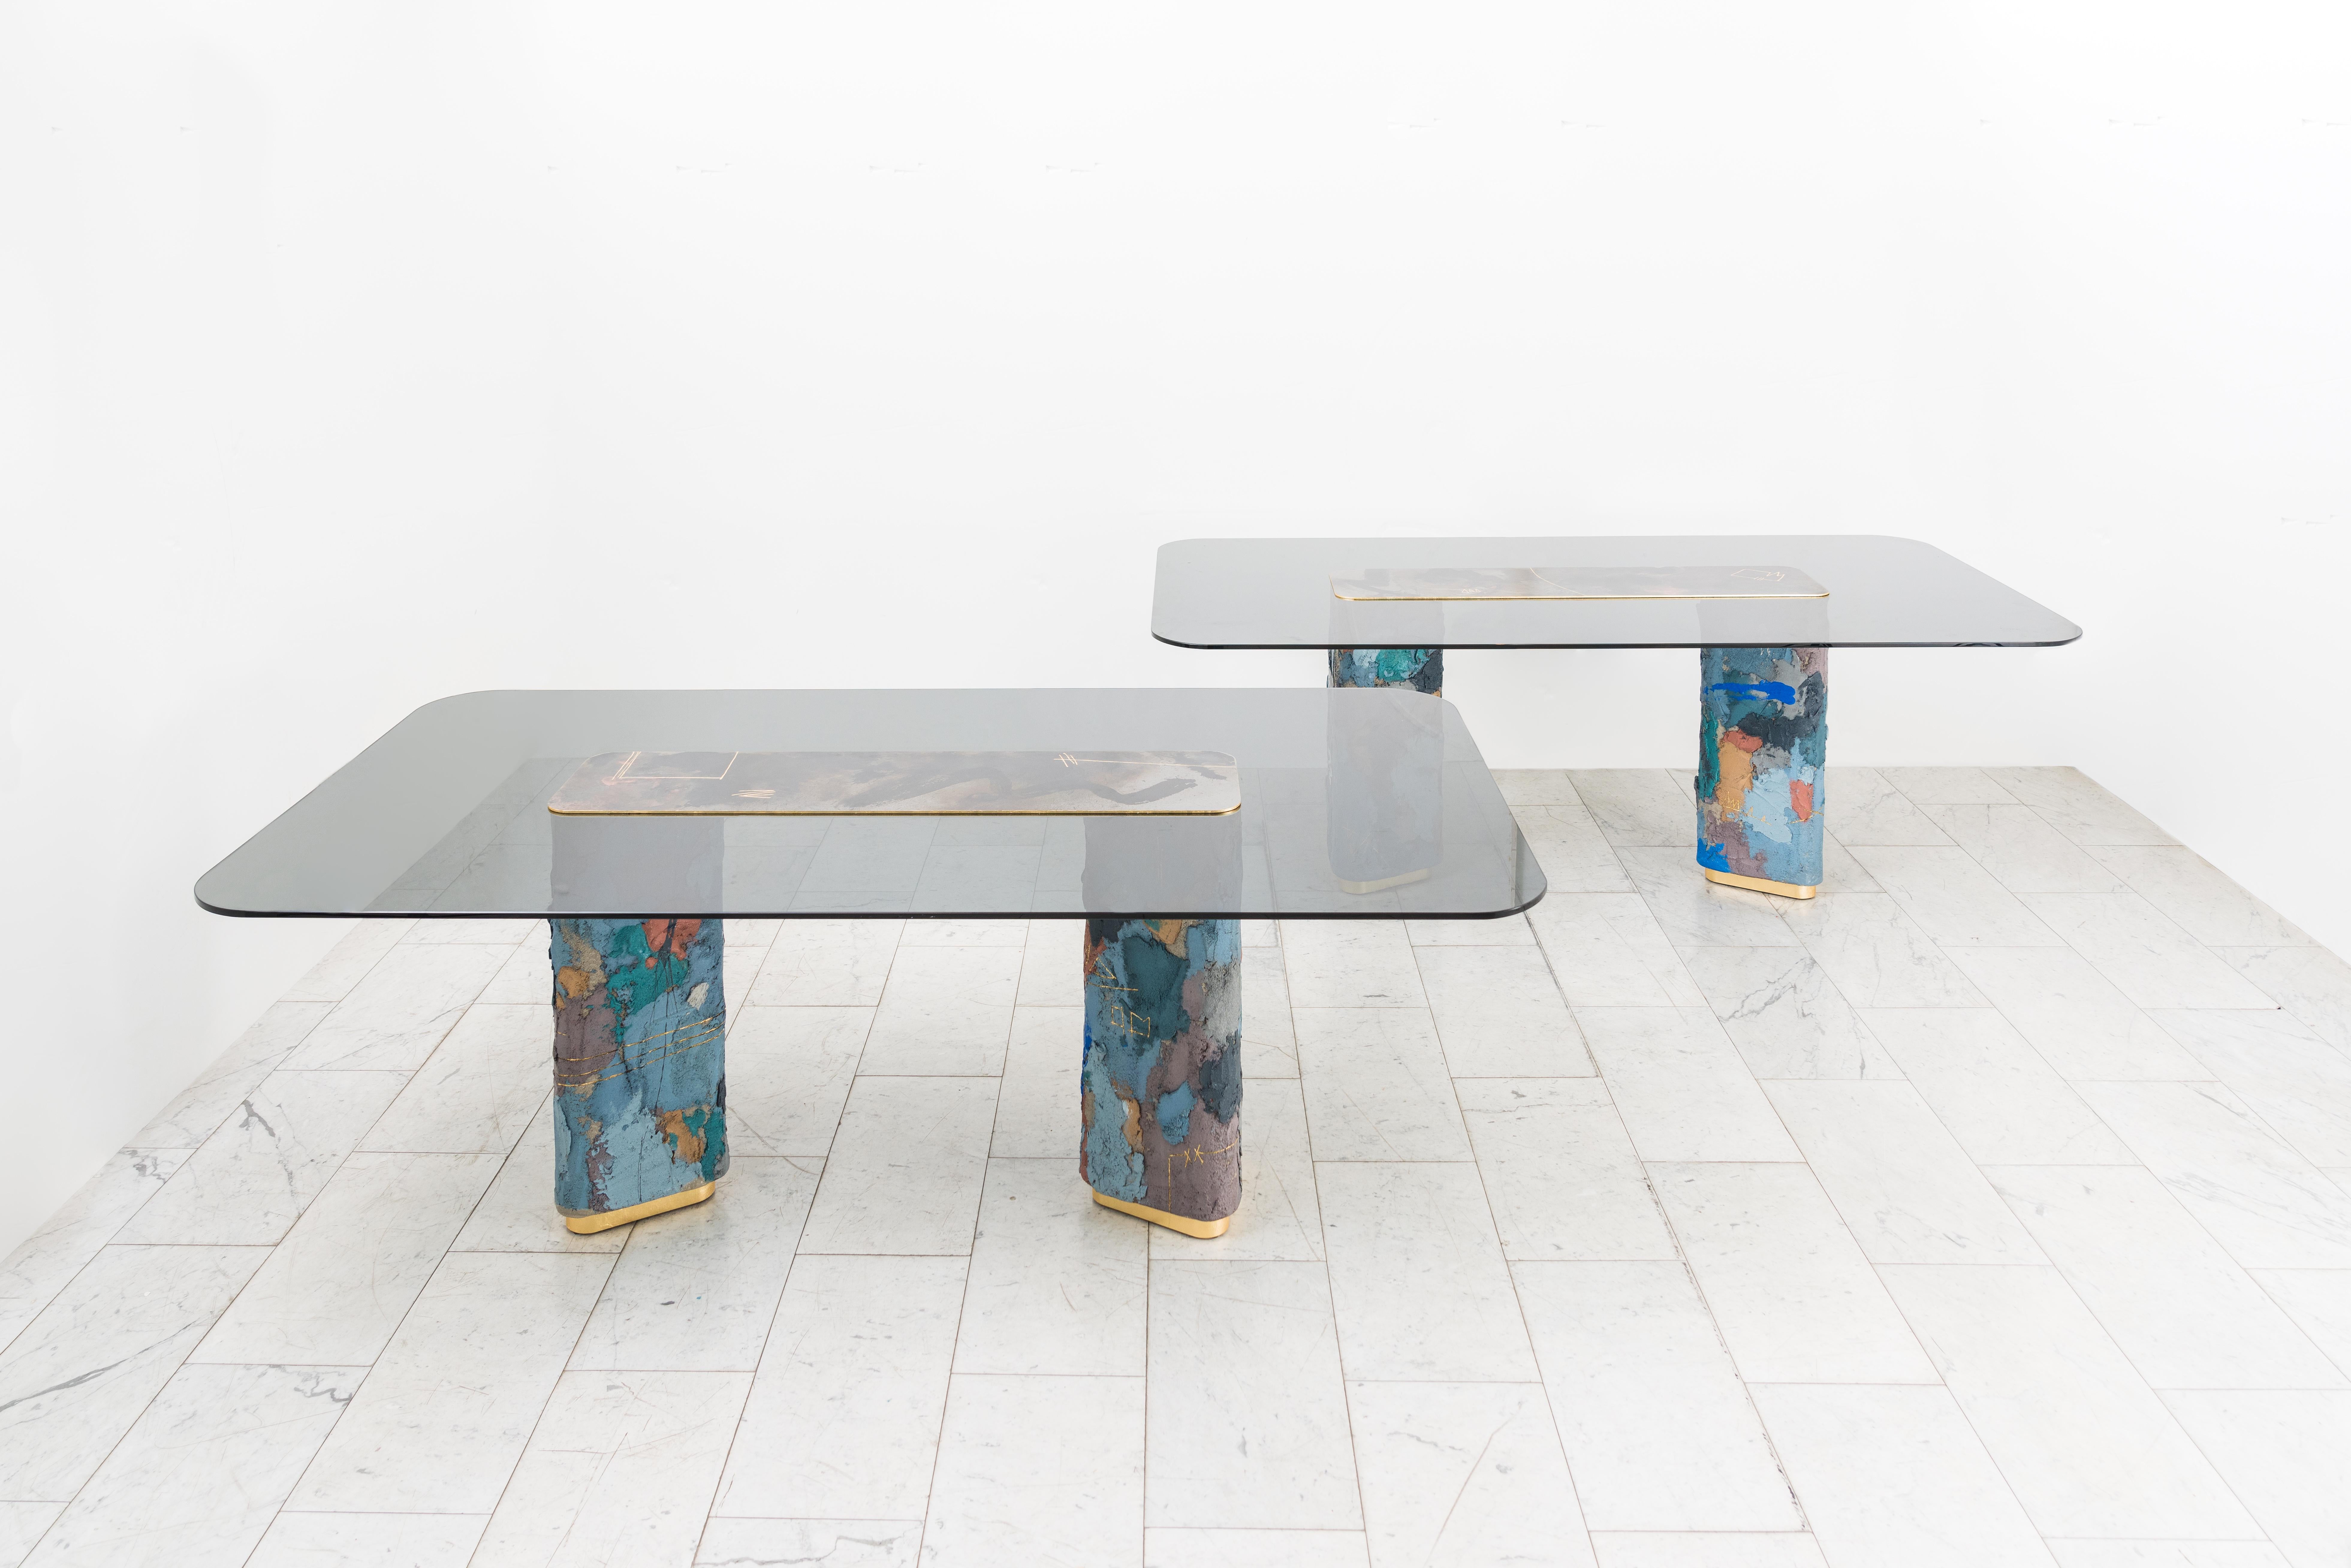 Stefan Rurak’s Concrete steel and glass dining table is available by commission. Custom dimensions and materials can be accommodated for interior or exterior spaces. Each sculptural table base is unique, demonstrating Rurak’s one-of-a-kind,